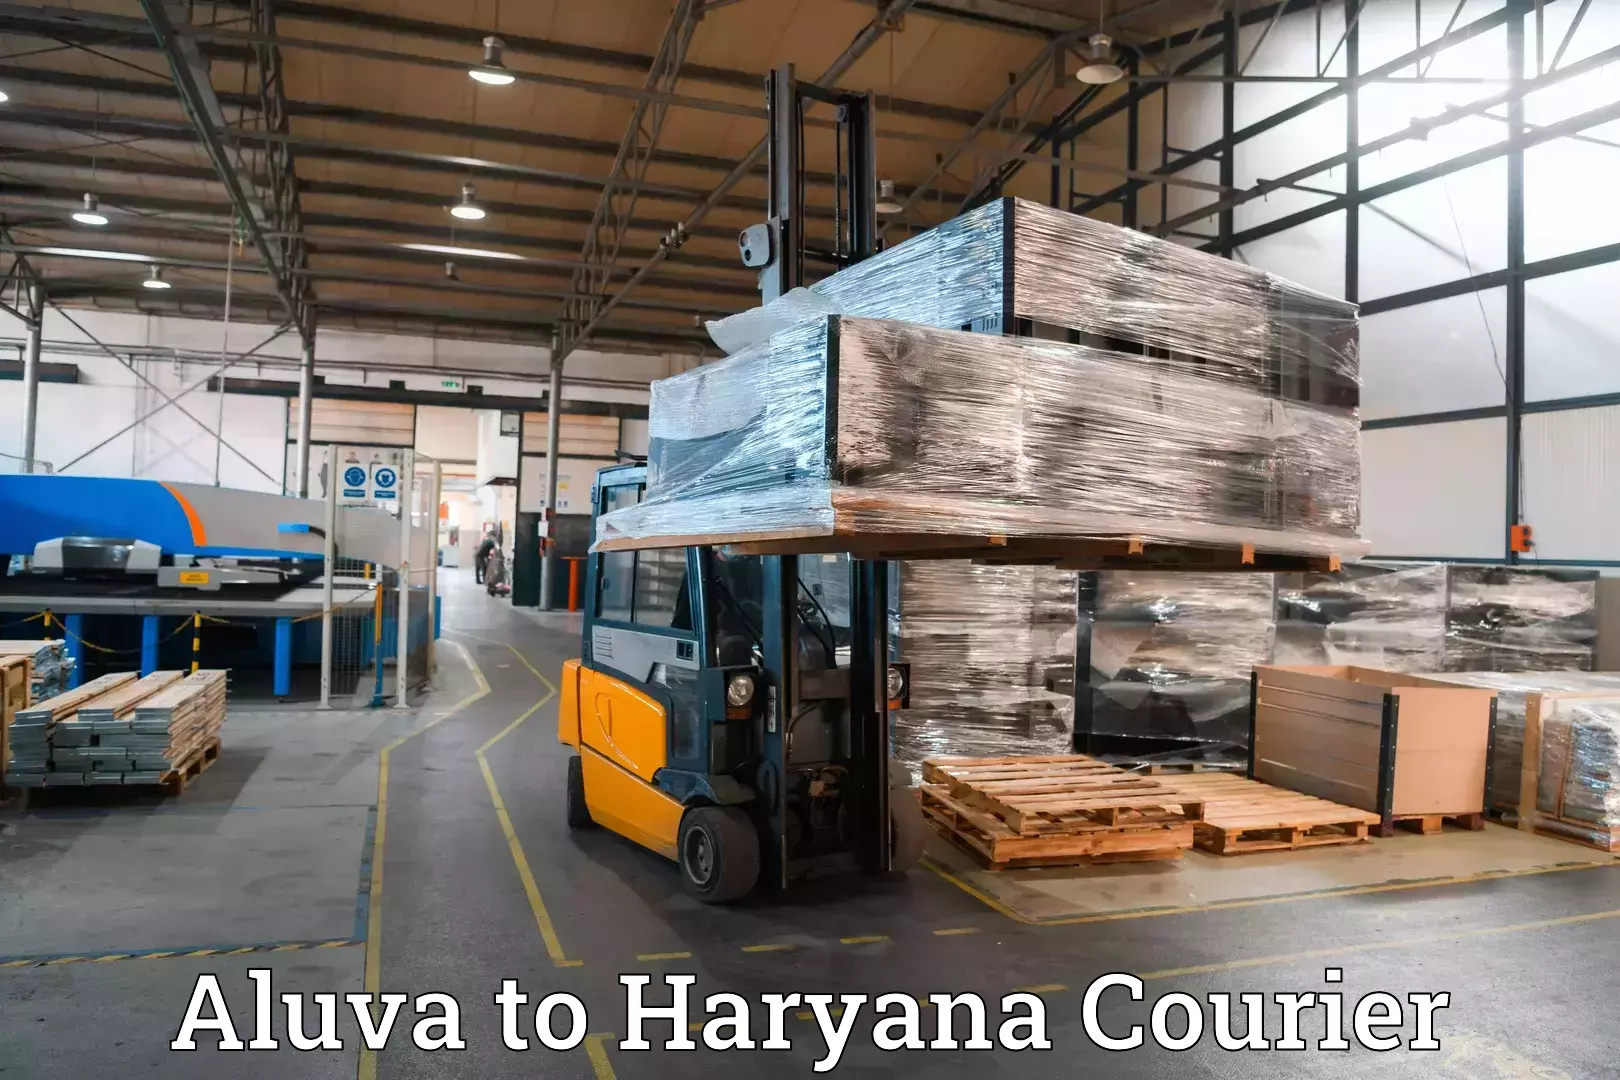 Luggage delivery network Aluva to Haryana